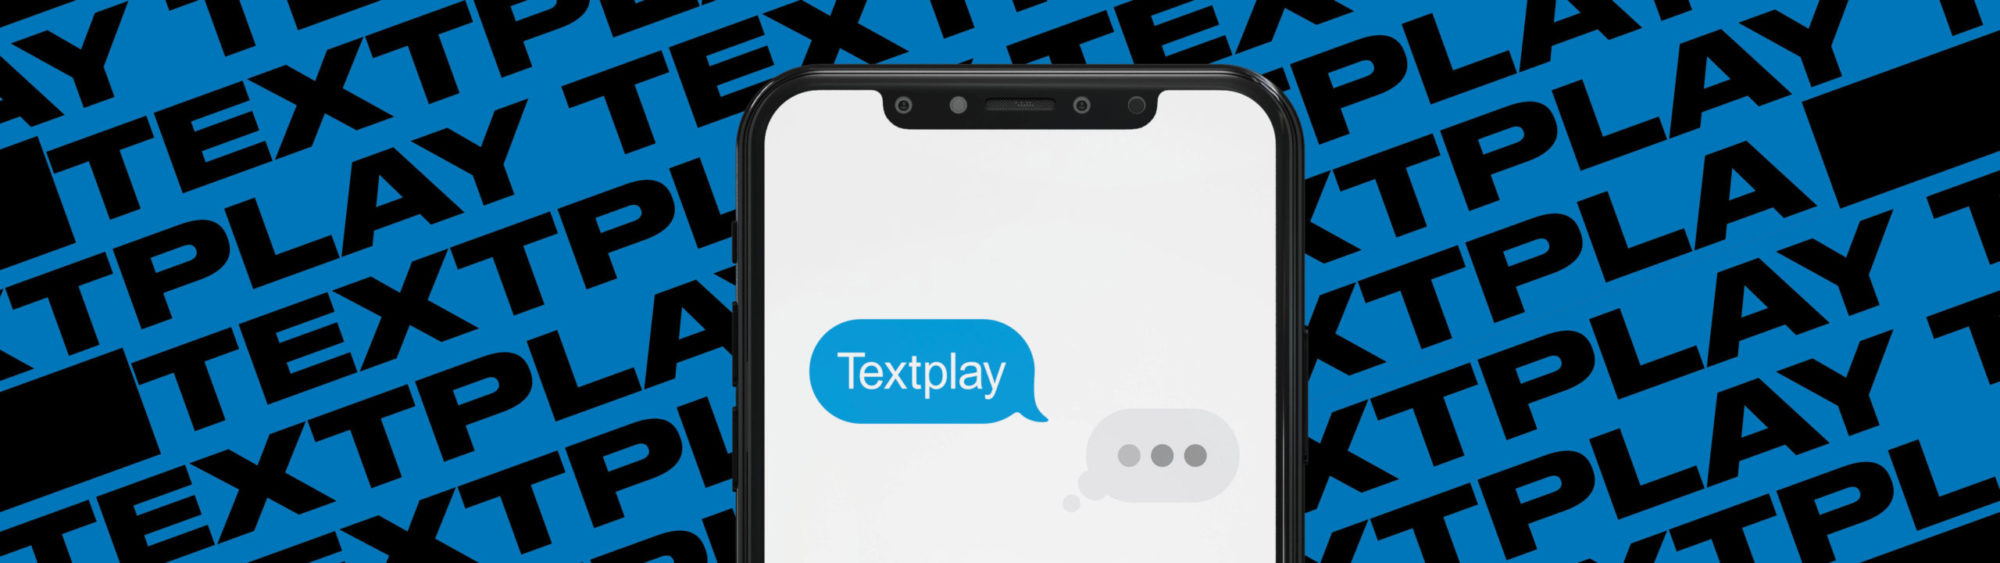 "textplay" in iphone message bubble